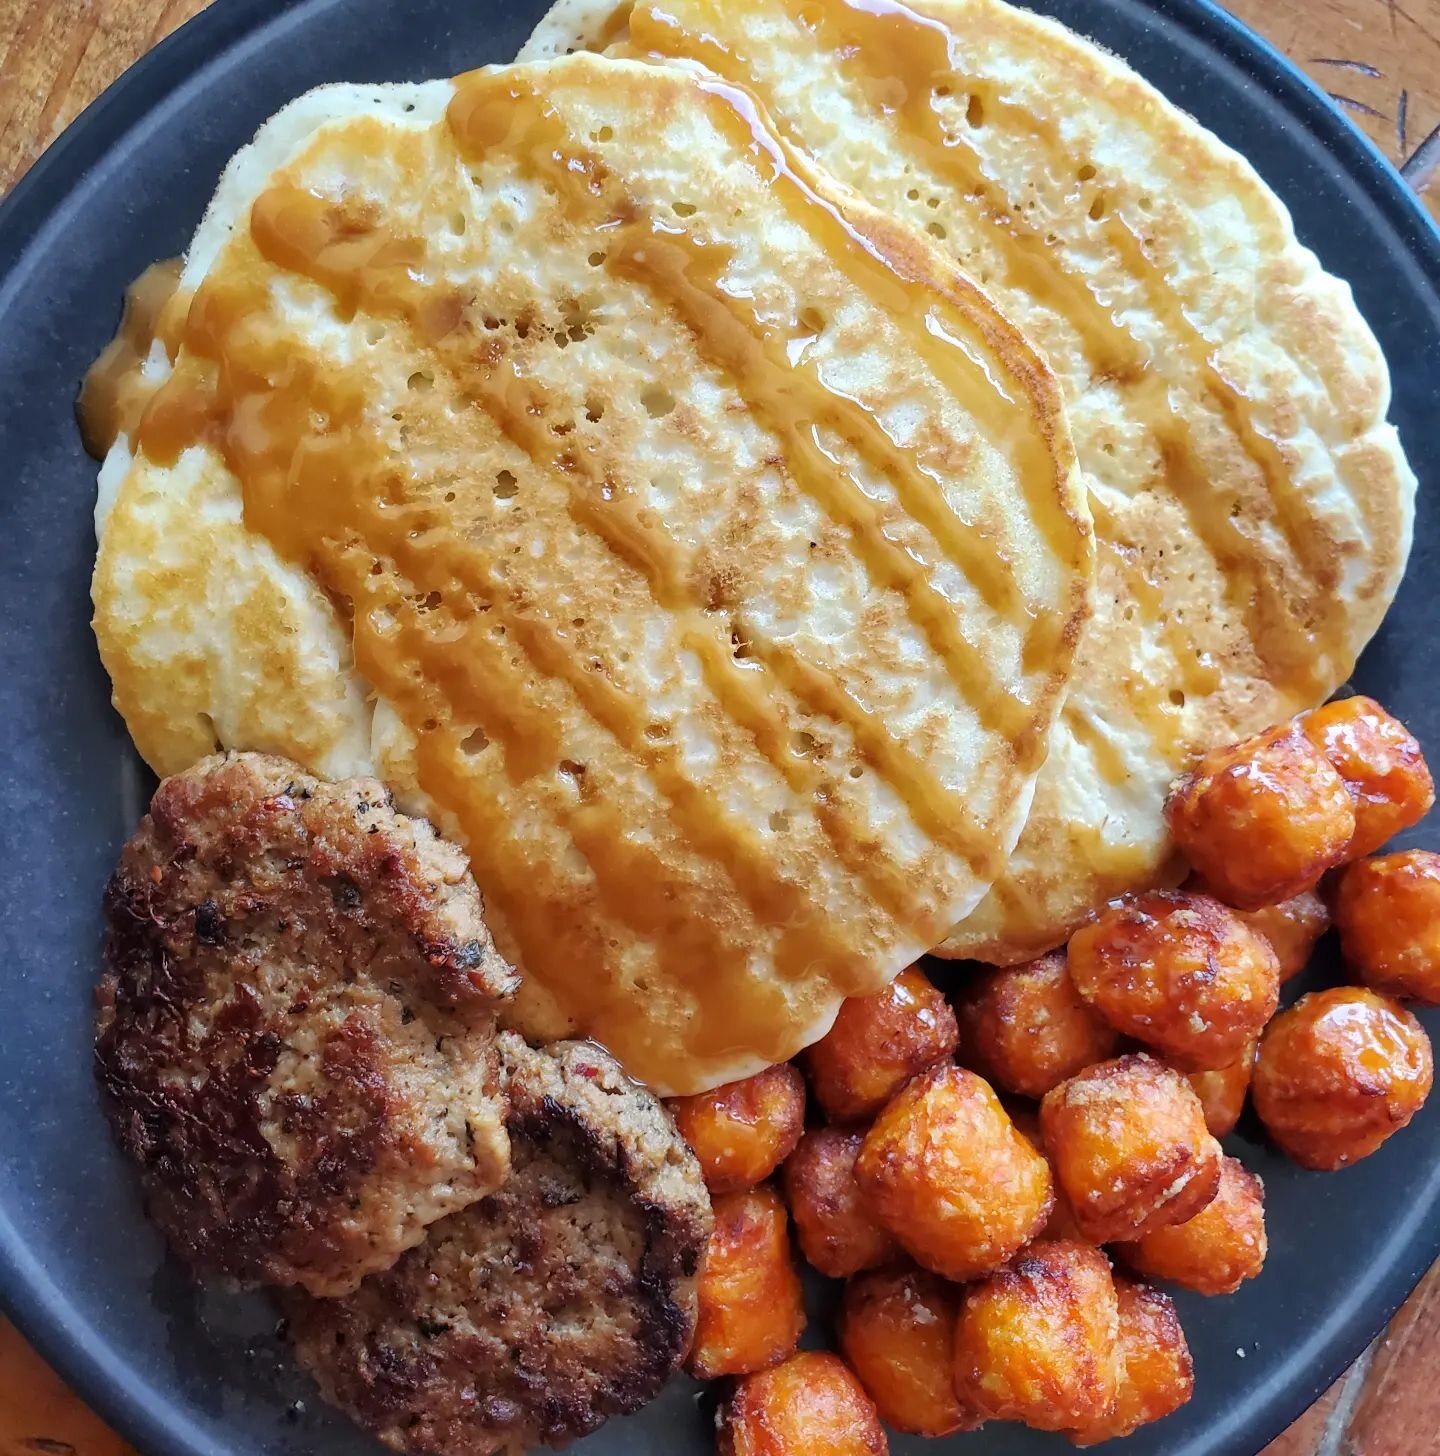 Pancake special today until 3 or sold out!!! 😋 

Two fluffy pancakes, sweet potato tots, @beyondmeat sausage,  and topped with a house made caramel butter glaze!  Get it while it lasts!! 

#cooperyoung #veganrestaurants #veganbreakfast #brunch #week